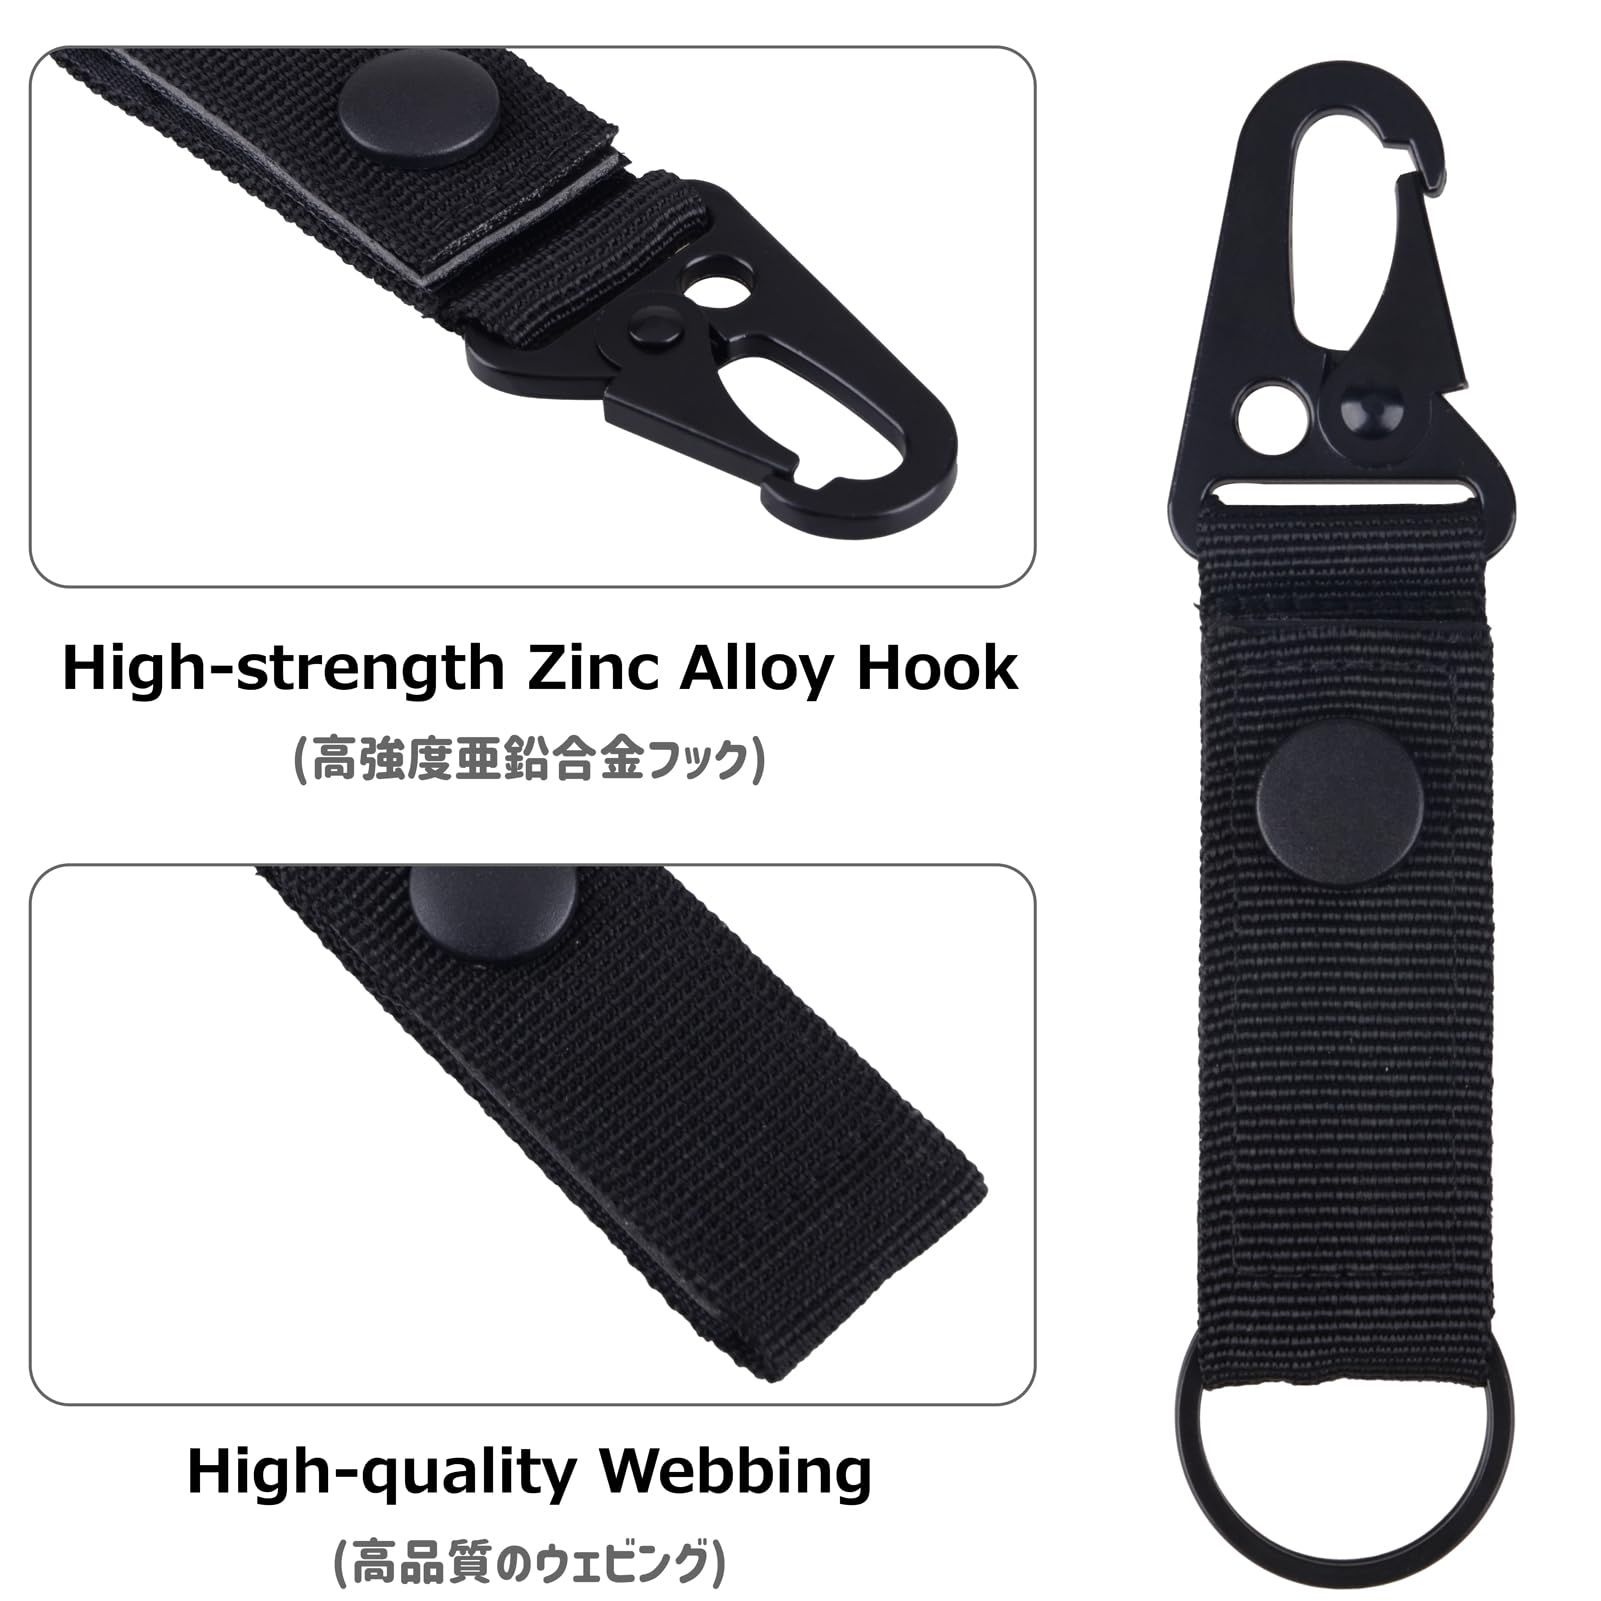 Azarxis Tactical Hanging Belt Webbing Carabiner Buckle Molle Strap Nylon Snap Hook Clip, Keychain Keyholder Ring Tactical Backpack Molle Clip for Climbing Hiking Outdoor (Black - Pack of 2)